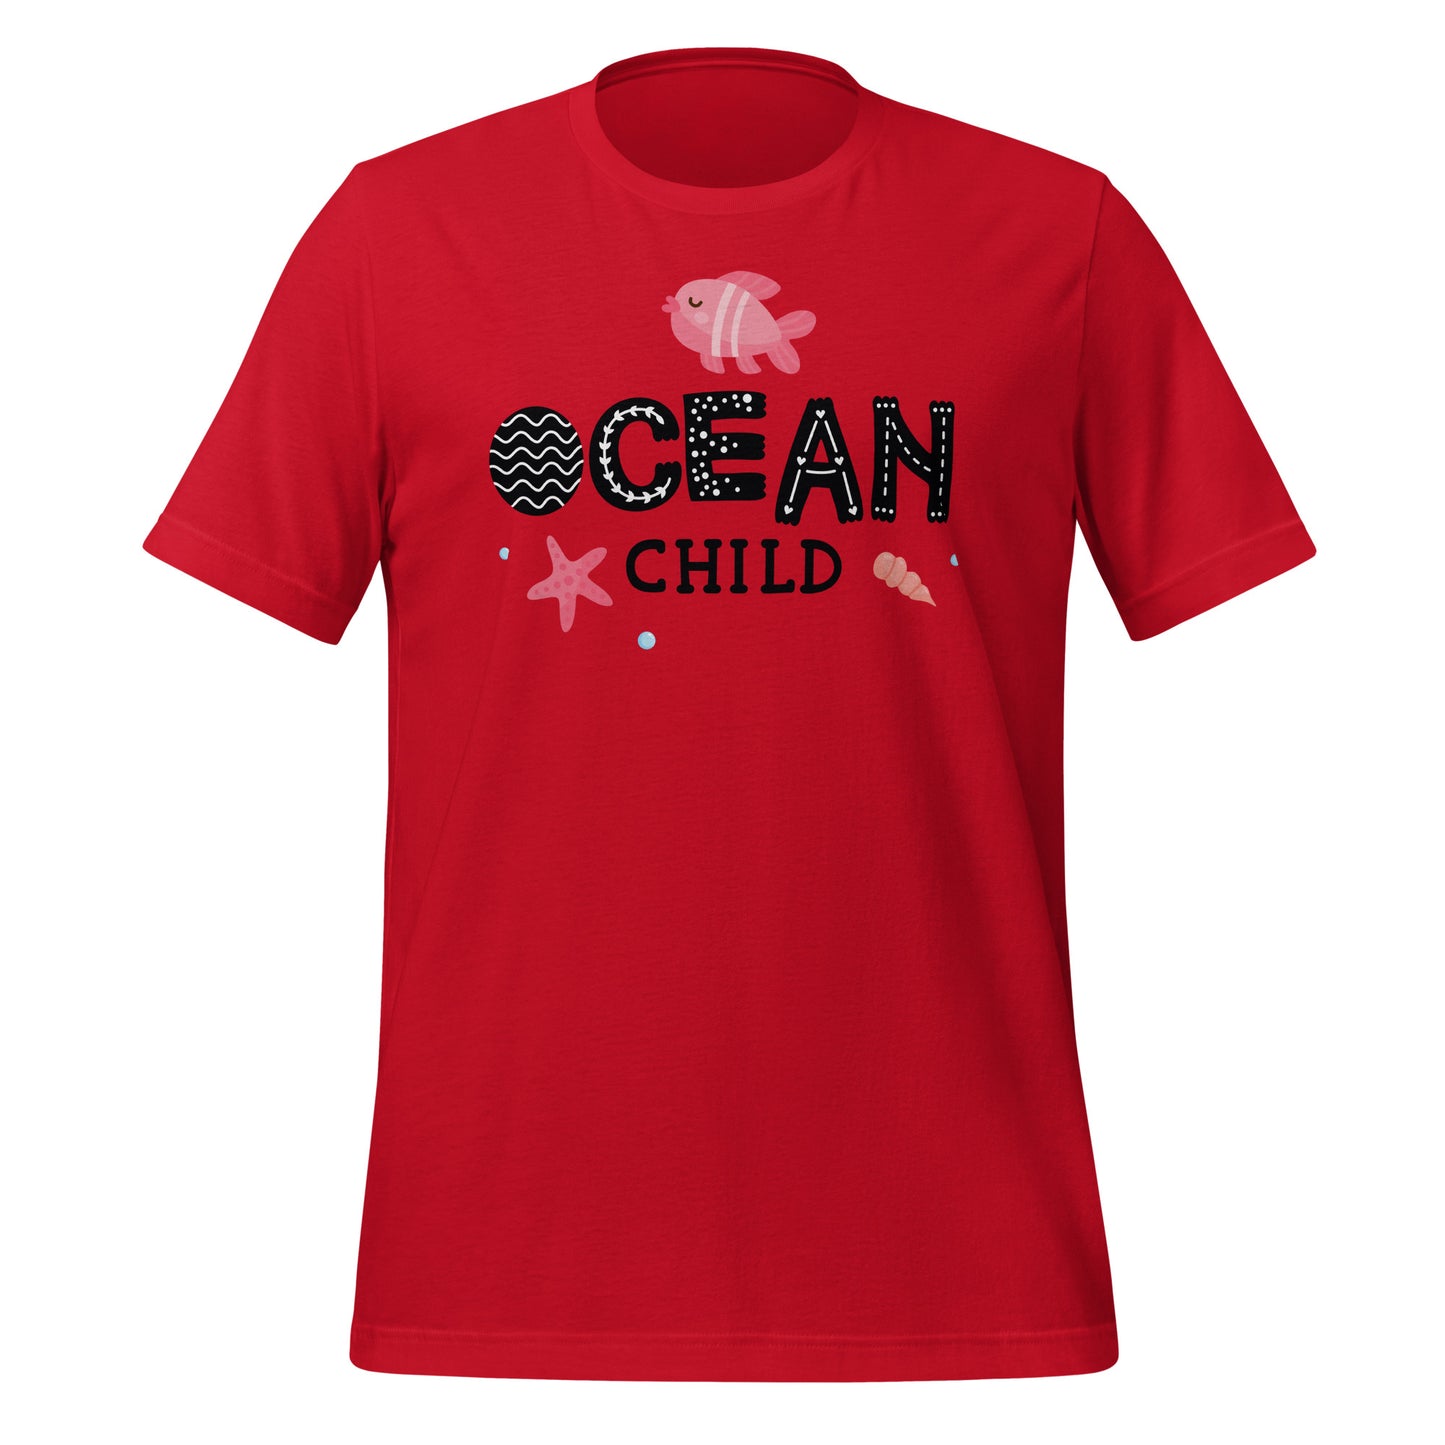 Ocean Child: Dive into Style with our Trendy T-shirt Collection!